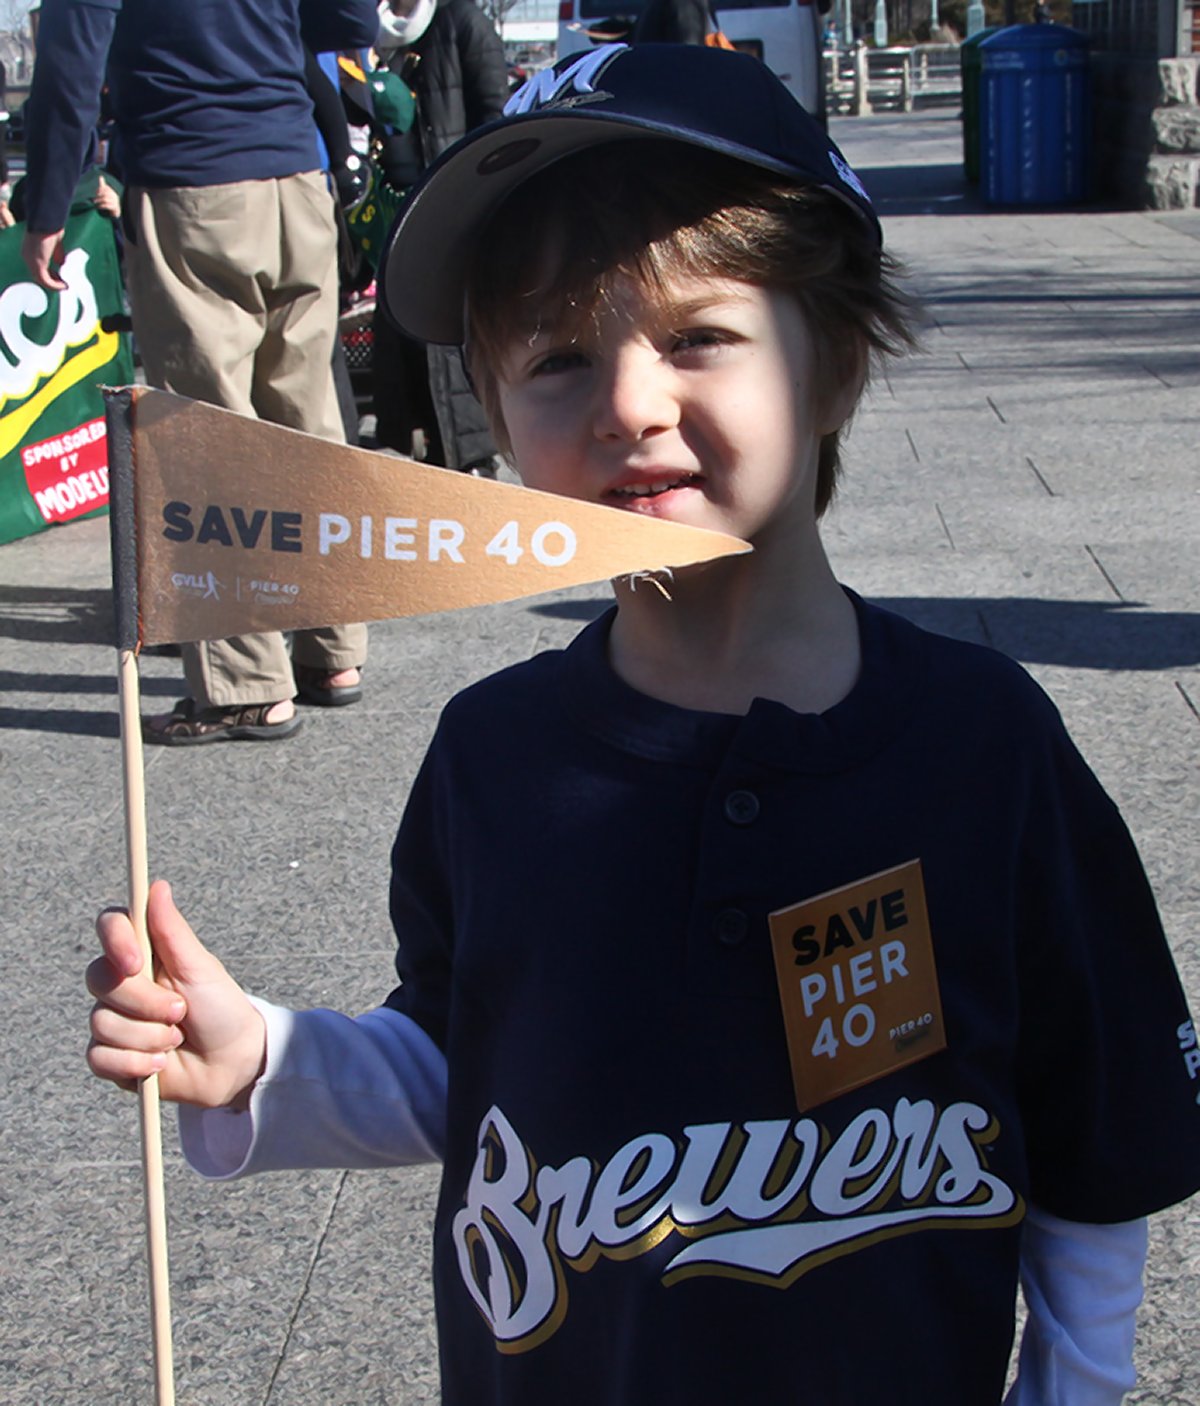 A Greenwich Village Little League ball player heading toward Pier 40 in a recent G.V.L.L. opening day parade. File photo by Tequila Minsky